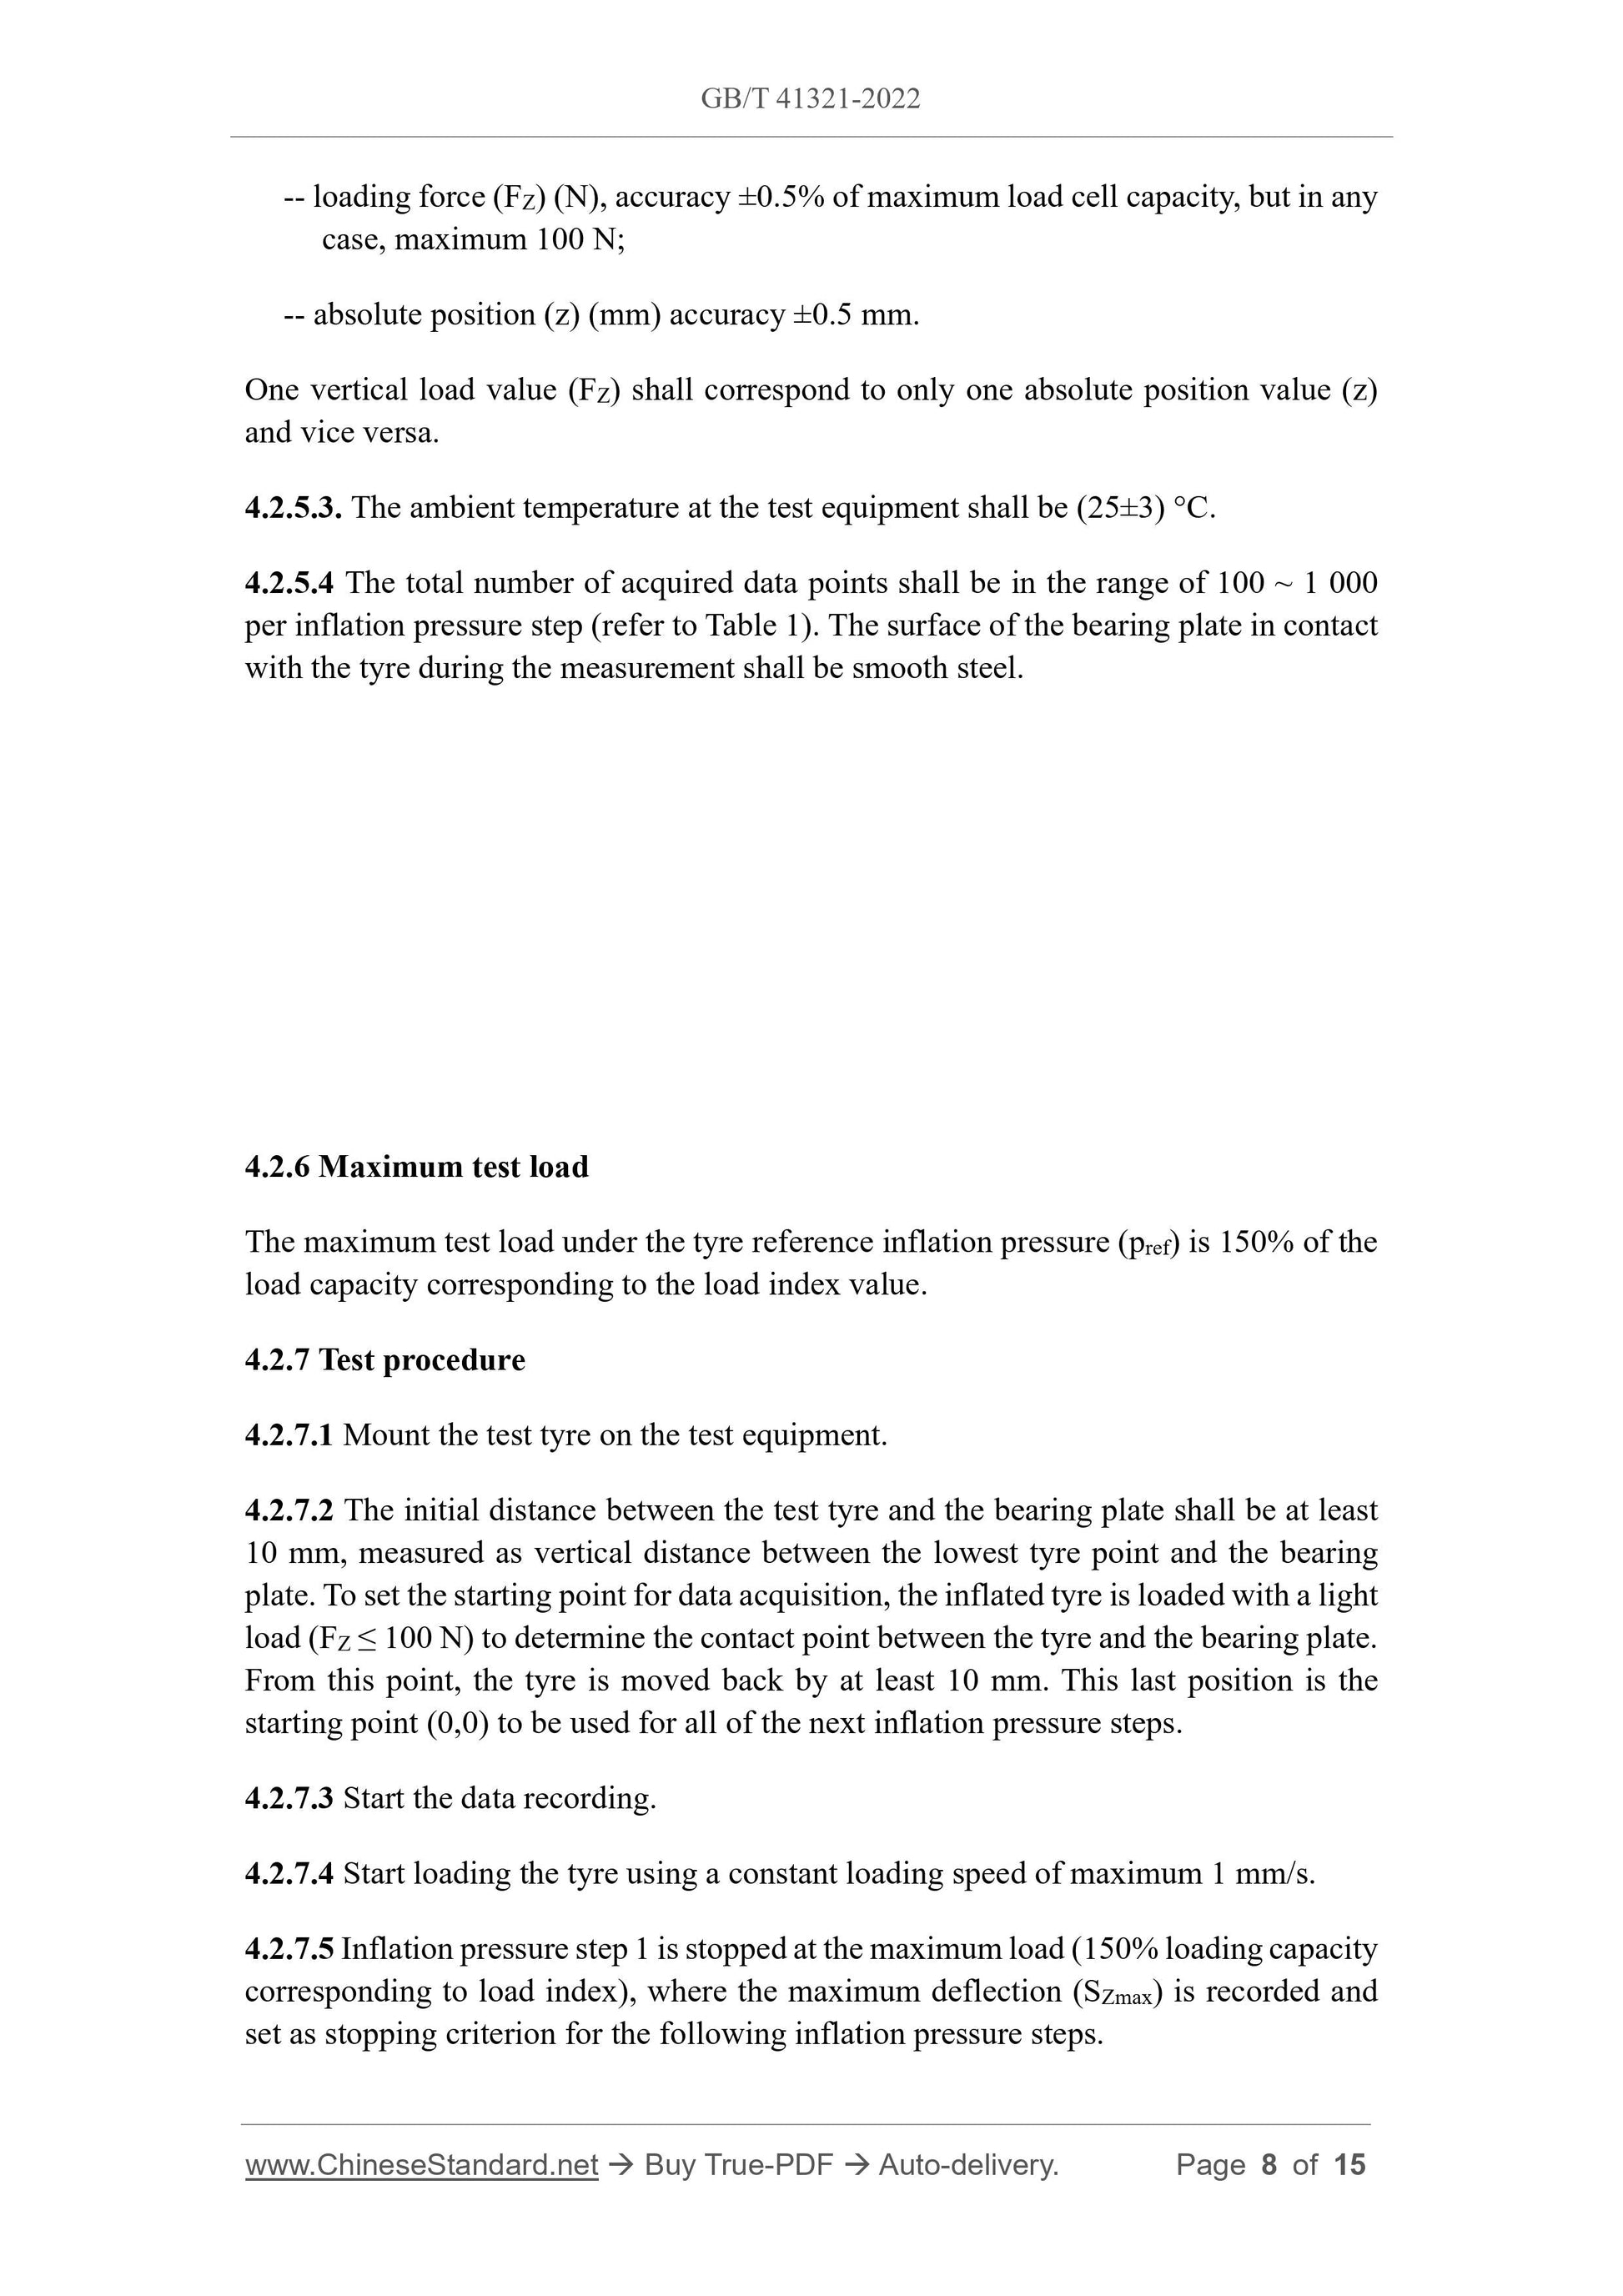 GB/T 41321-2022 Page 6